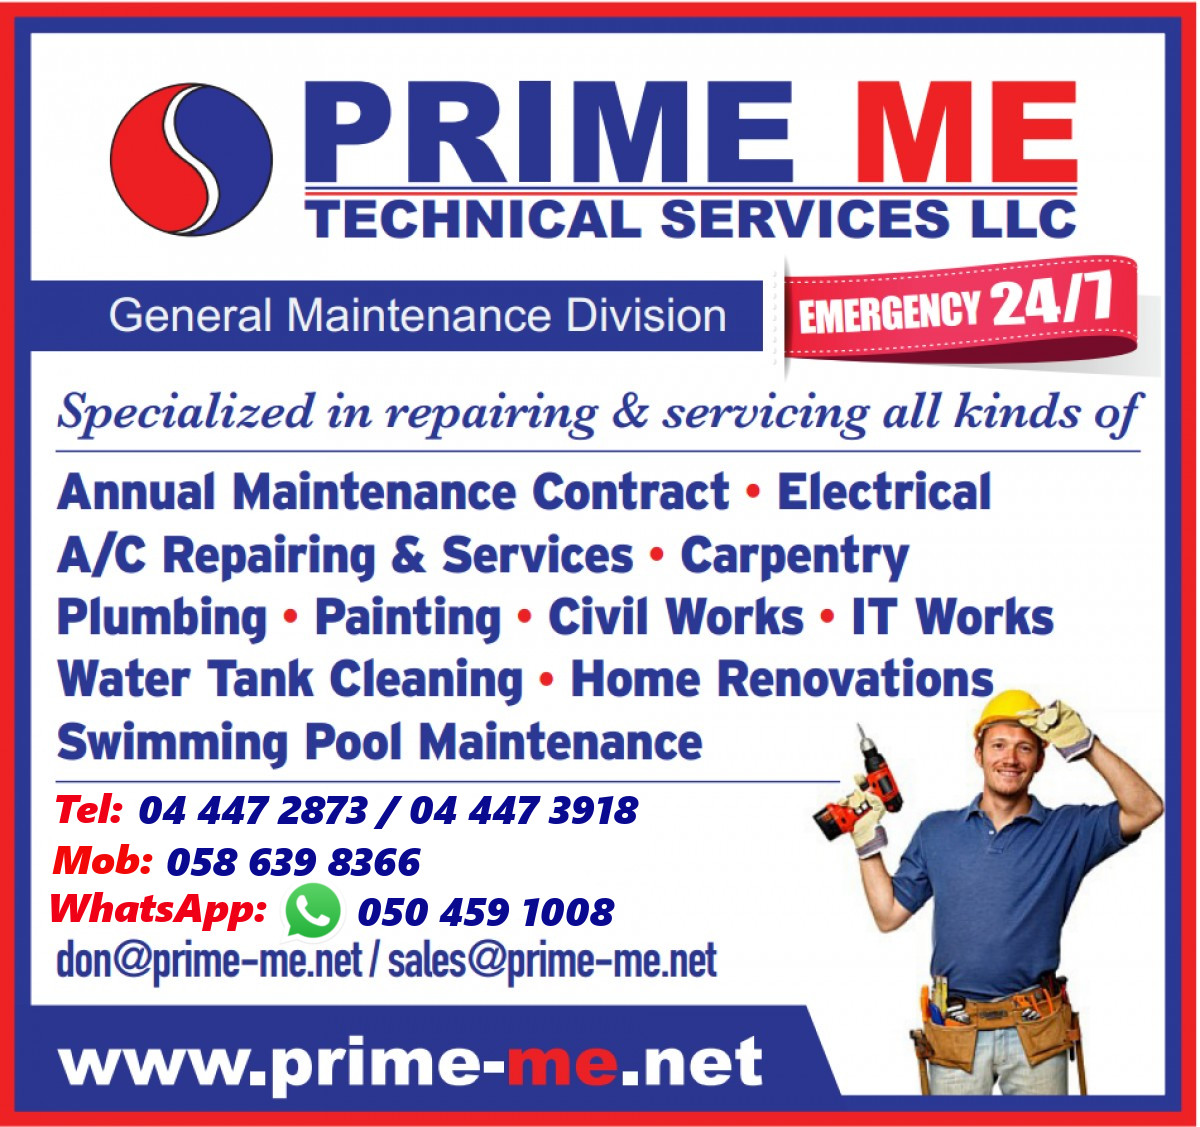 Prime ME Technical Services LLC. For all your technical needs.